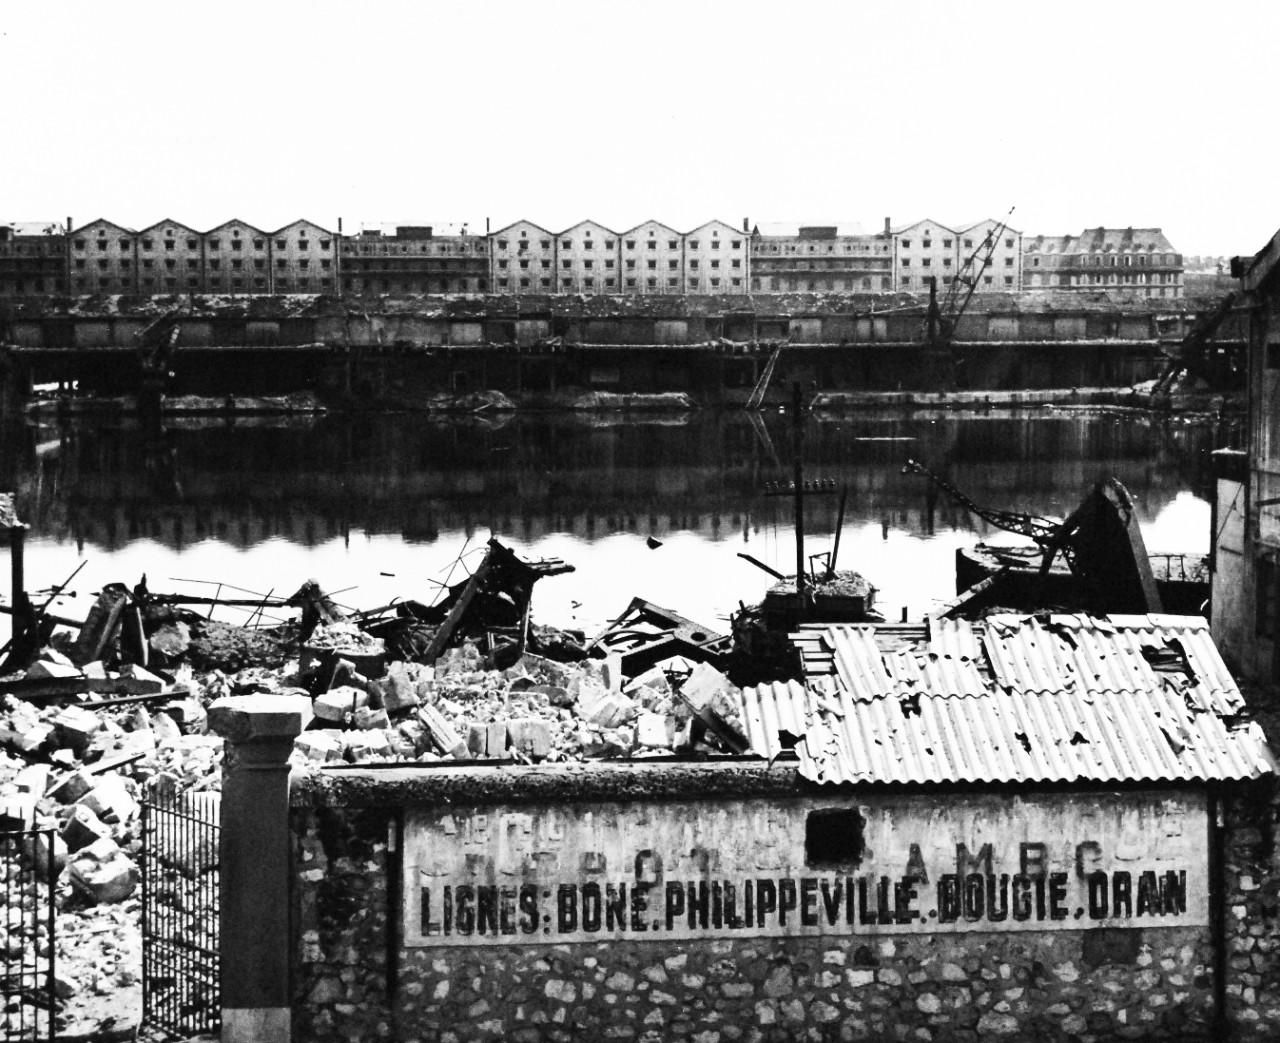 80-G-364062:  Invasion of Southern France, Marseille, August 1944.   Destruction to the harbor and installations at Marseilles, France.  Taken by crew of USS Catoctin (AGC-5).  Photograph received on 2 April 1946.   Official U.S. Navy Photograph, now in the collections of the National Archives.  (2014/7/10).